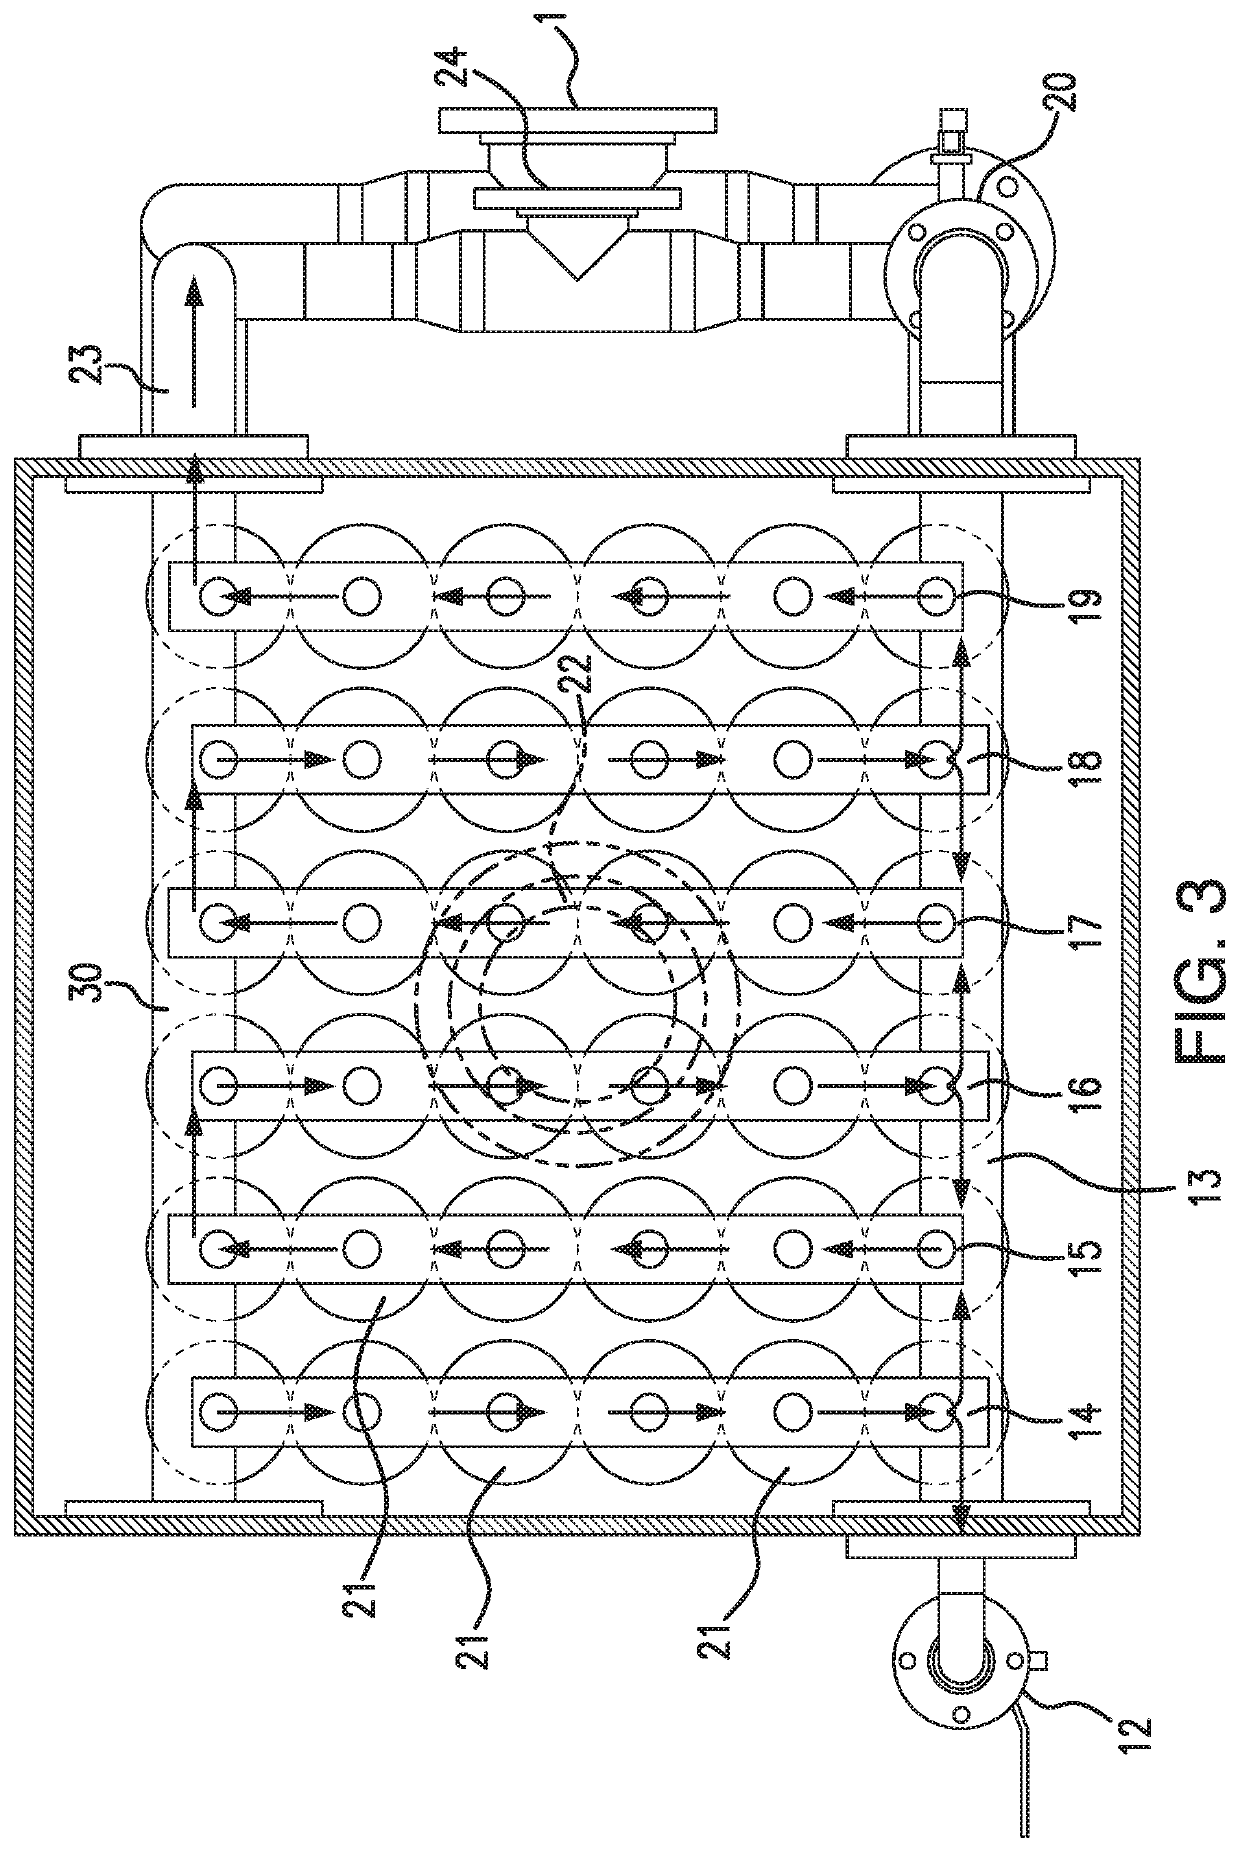 Compact membrane module system for gas separation